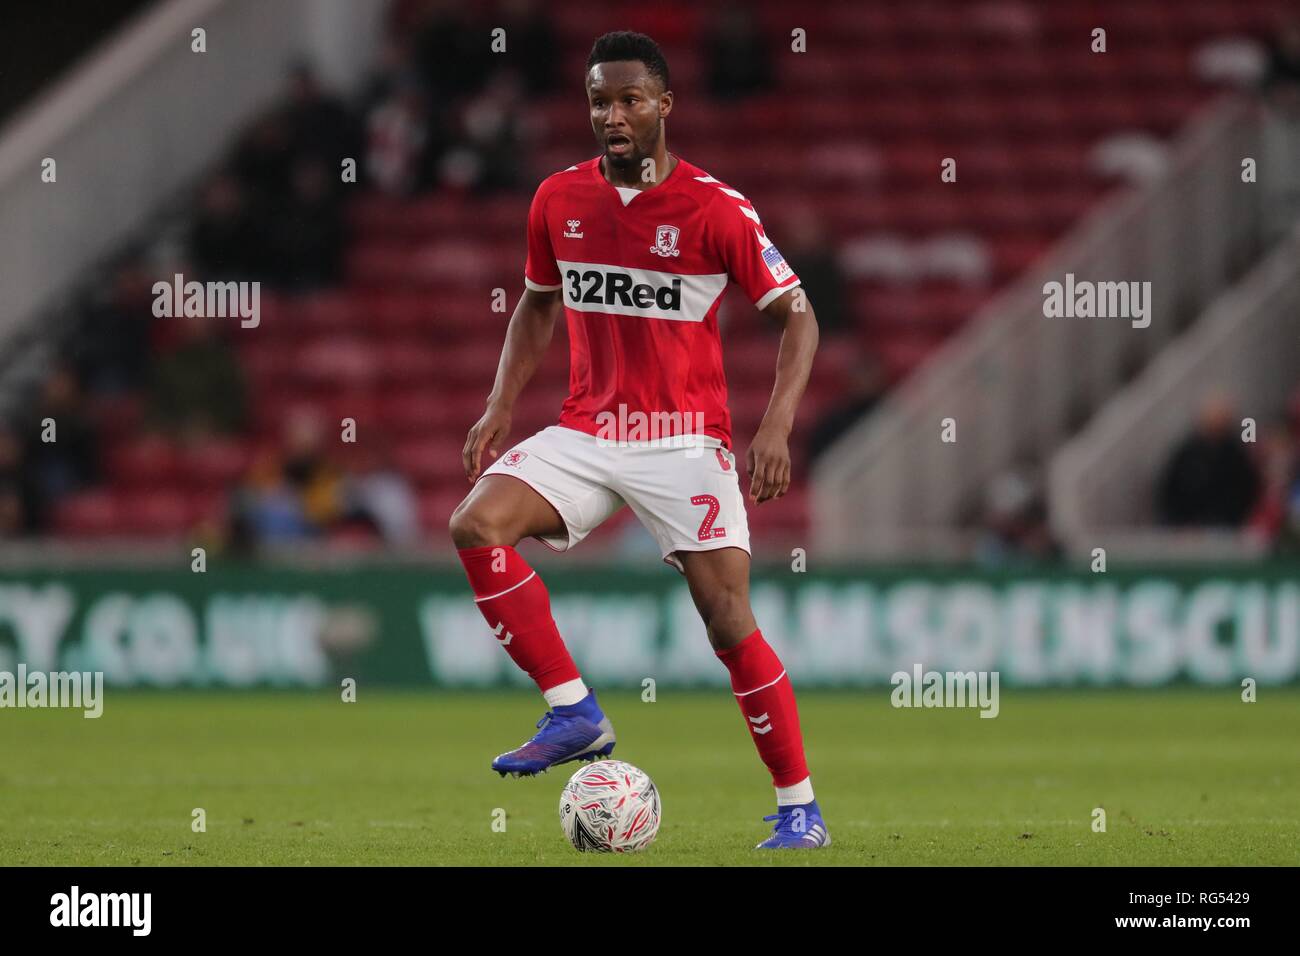 JOHN OBI MIKEL, MIDDLESBROUGH FC Middlesbrough FC V NEWPORT COUNTY FC, EMIRATES FA Cup 4. Runde, 2019 Stockfoto